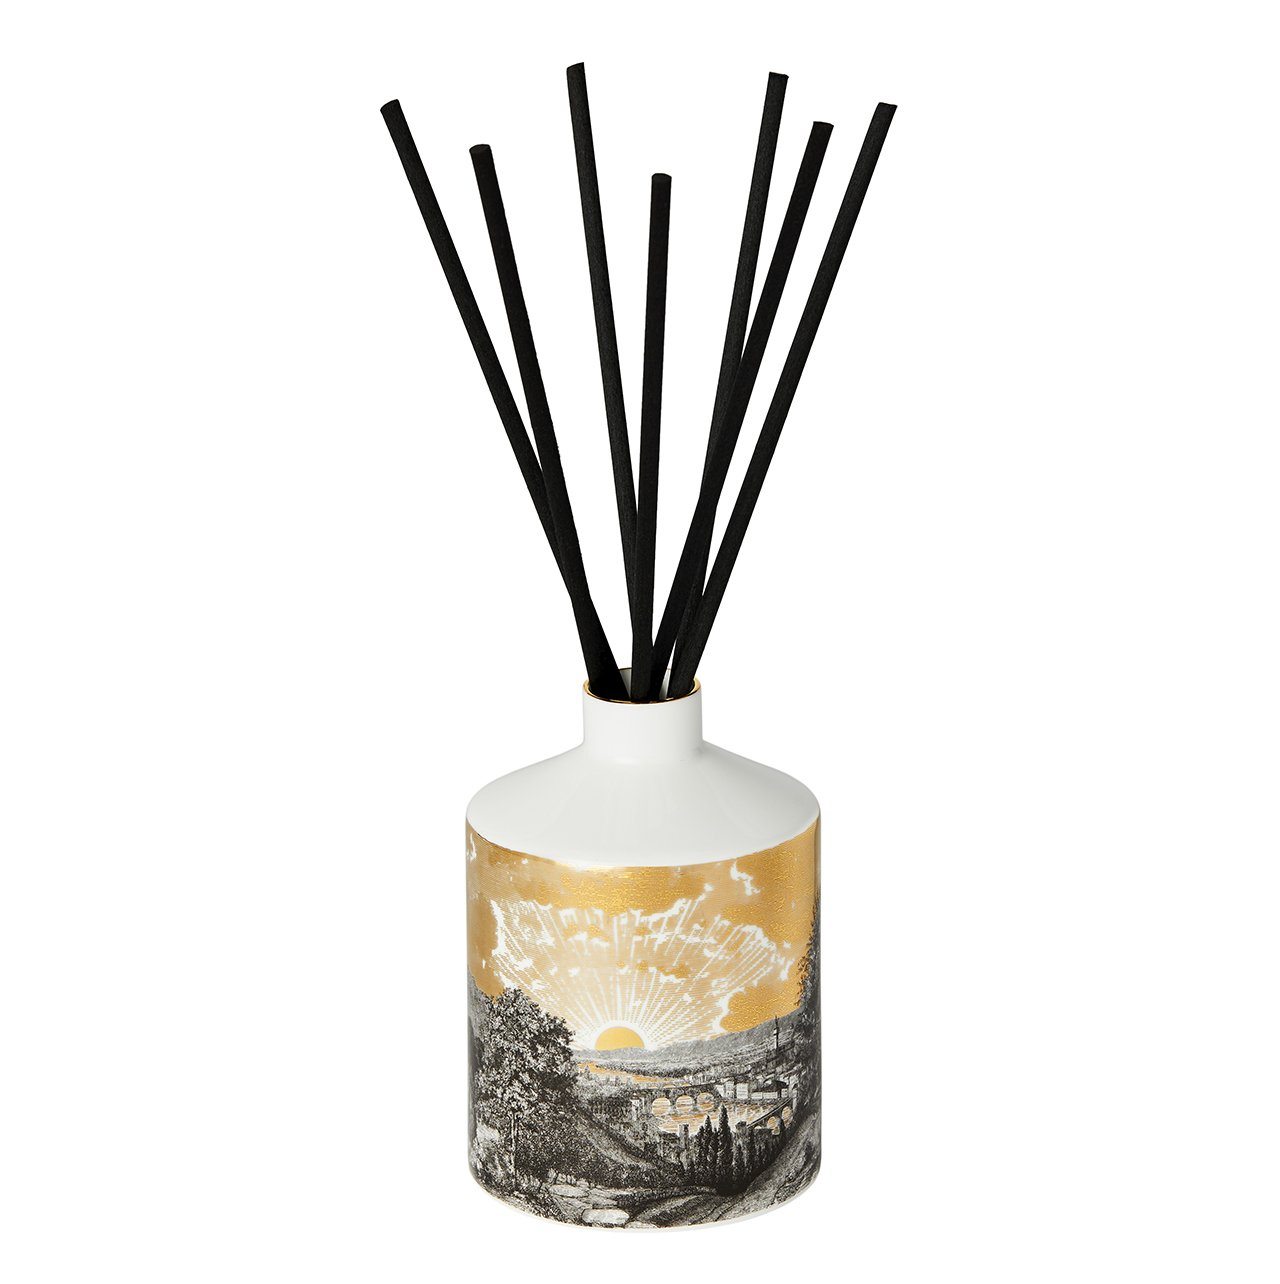 The Tuscan Sunset Ceramic Reed Diffuser